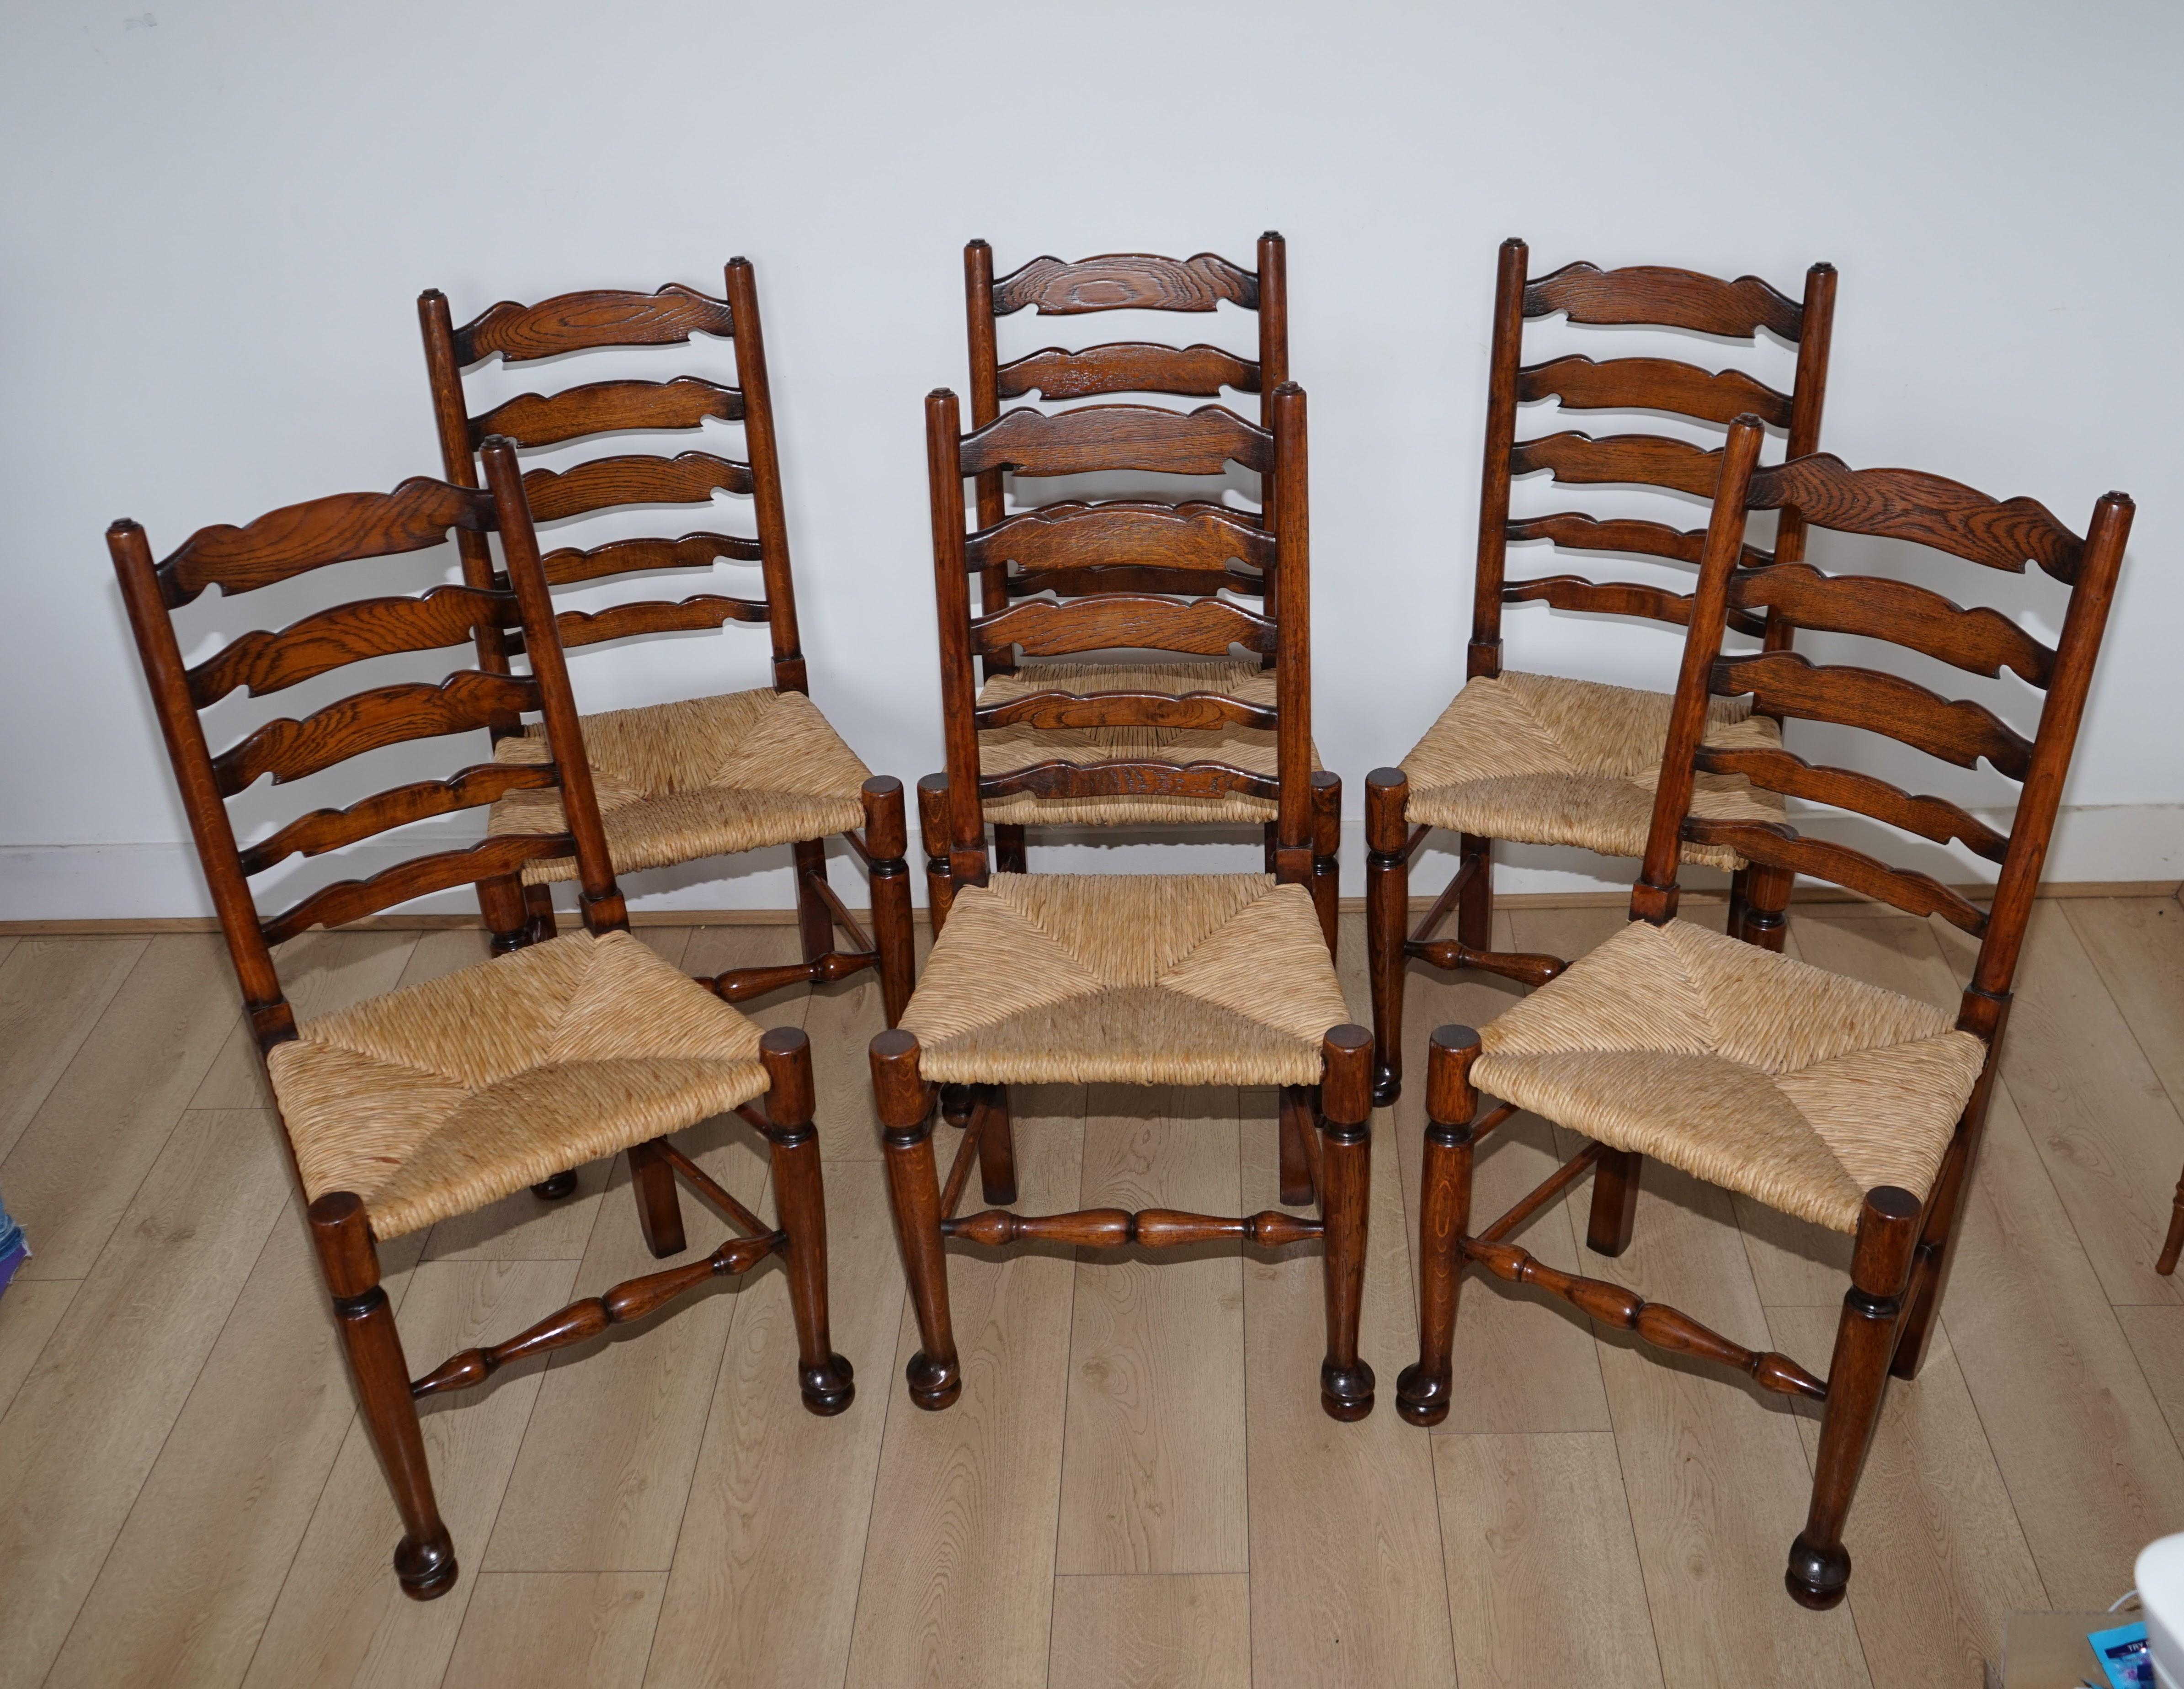 We are delighted to offer for auction this lovely set of Dutch ladder back oak rush seat dining chairs.

A very attractive and well-made set, the seat presented original rush woven straw. The timeless design show simplicity, and creativity. The